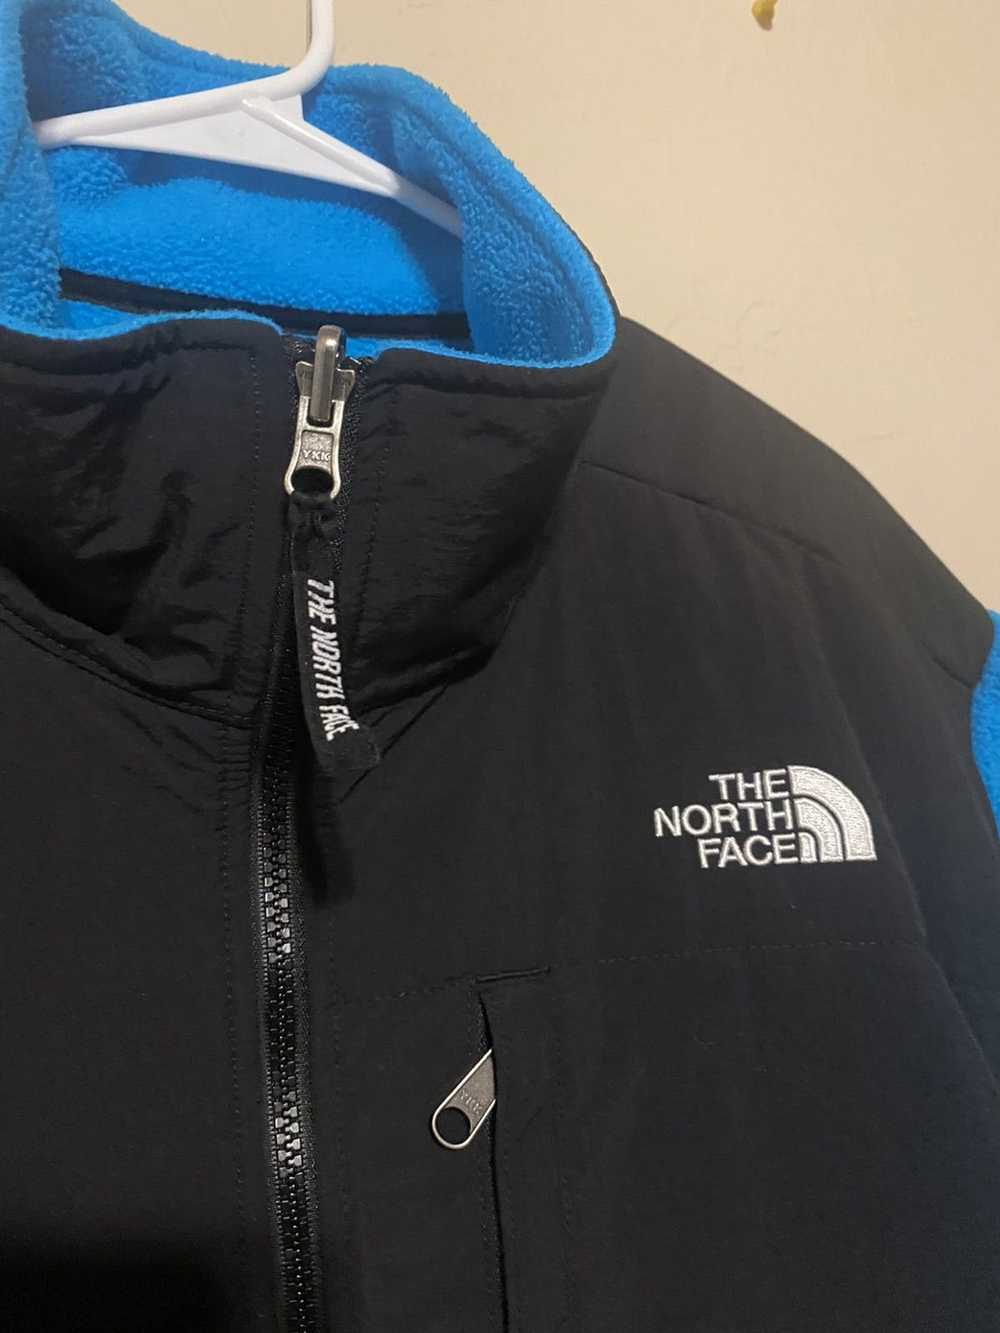 The North Face THE NORTH FACE blue fleece jacket - image 3